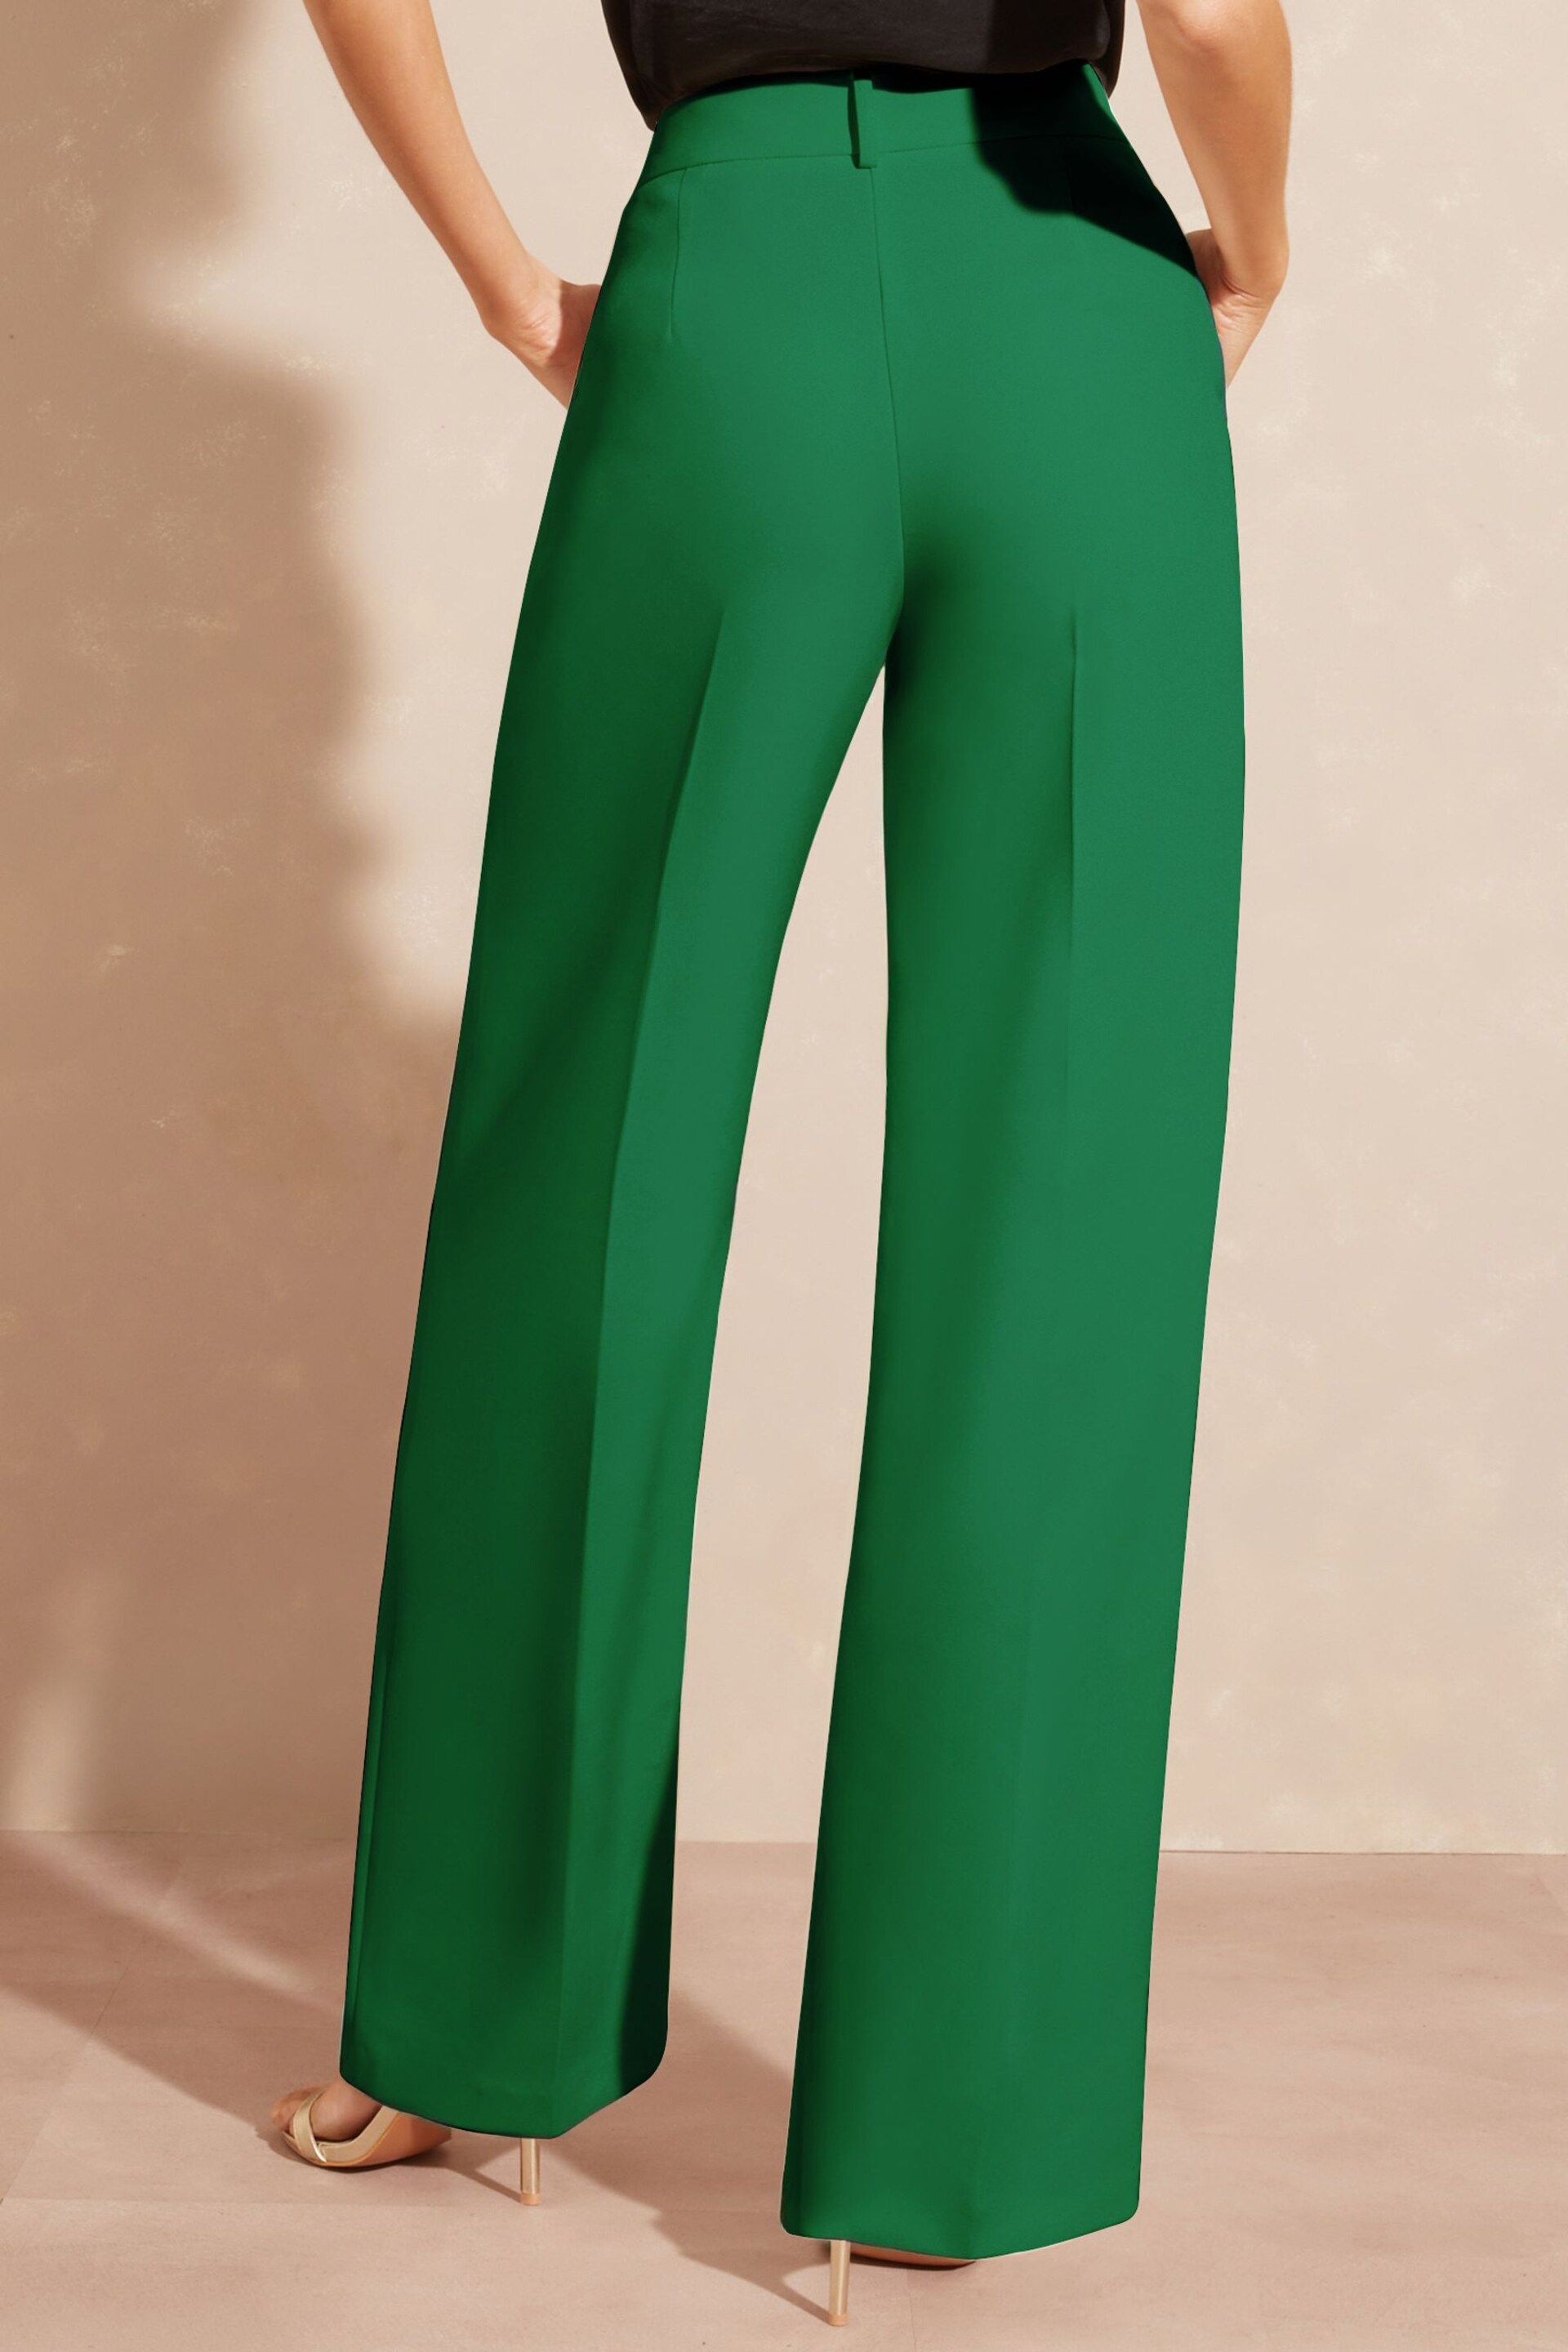 Love & Roses Green High Waist Wide Leg Tailored Trousers - Image 3 of 4